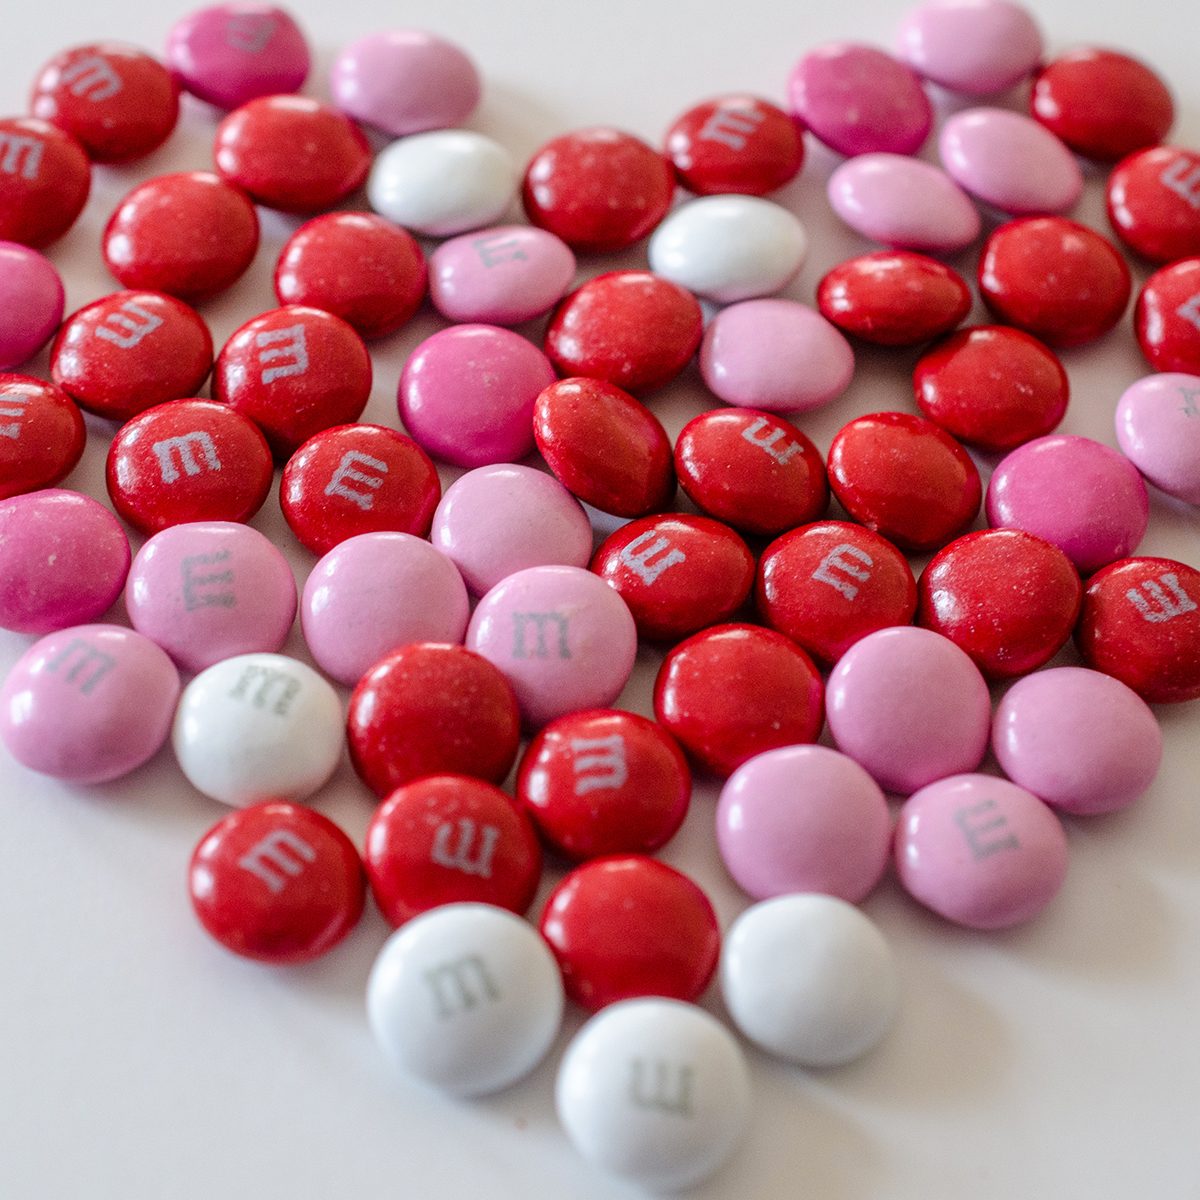 New Strawberry Shake M&M's Are Here for Valentine's Day